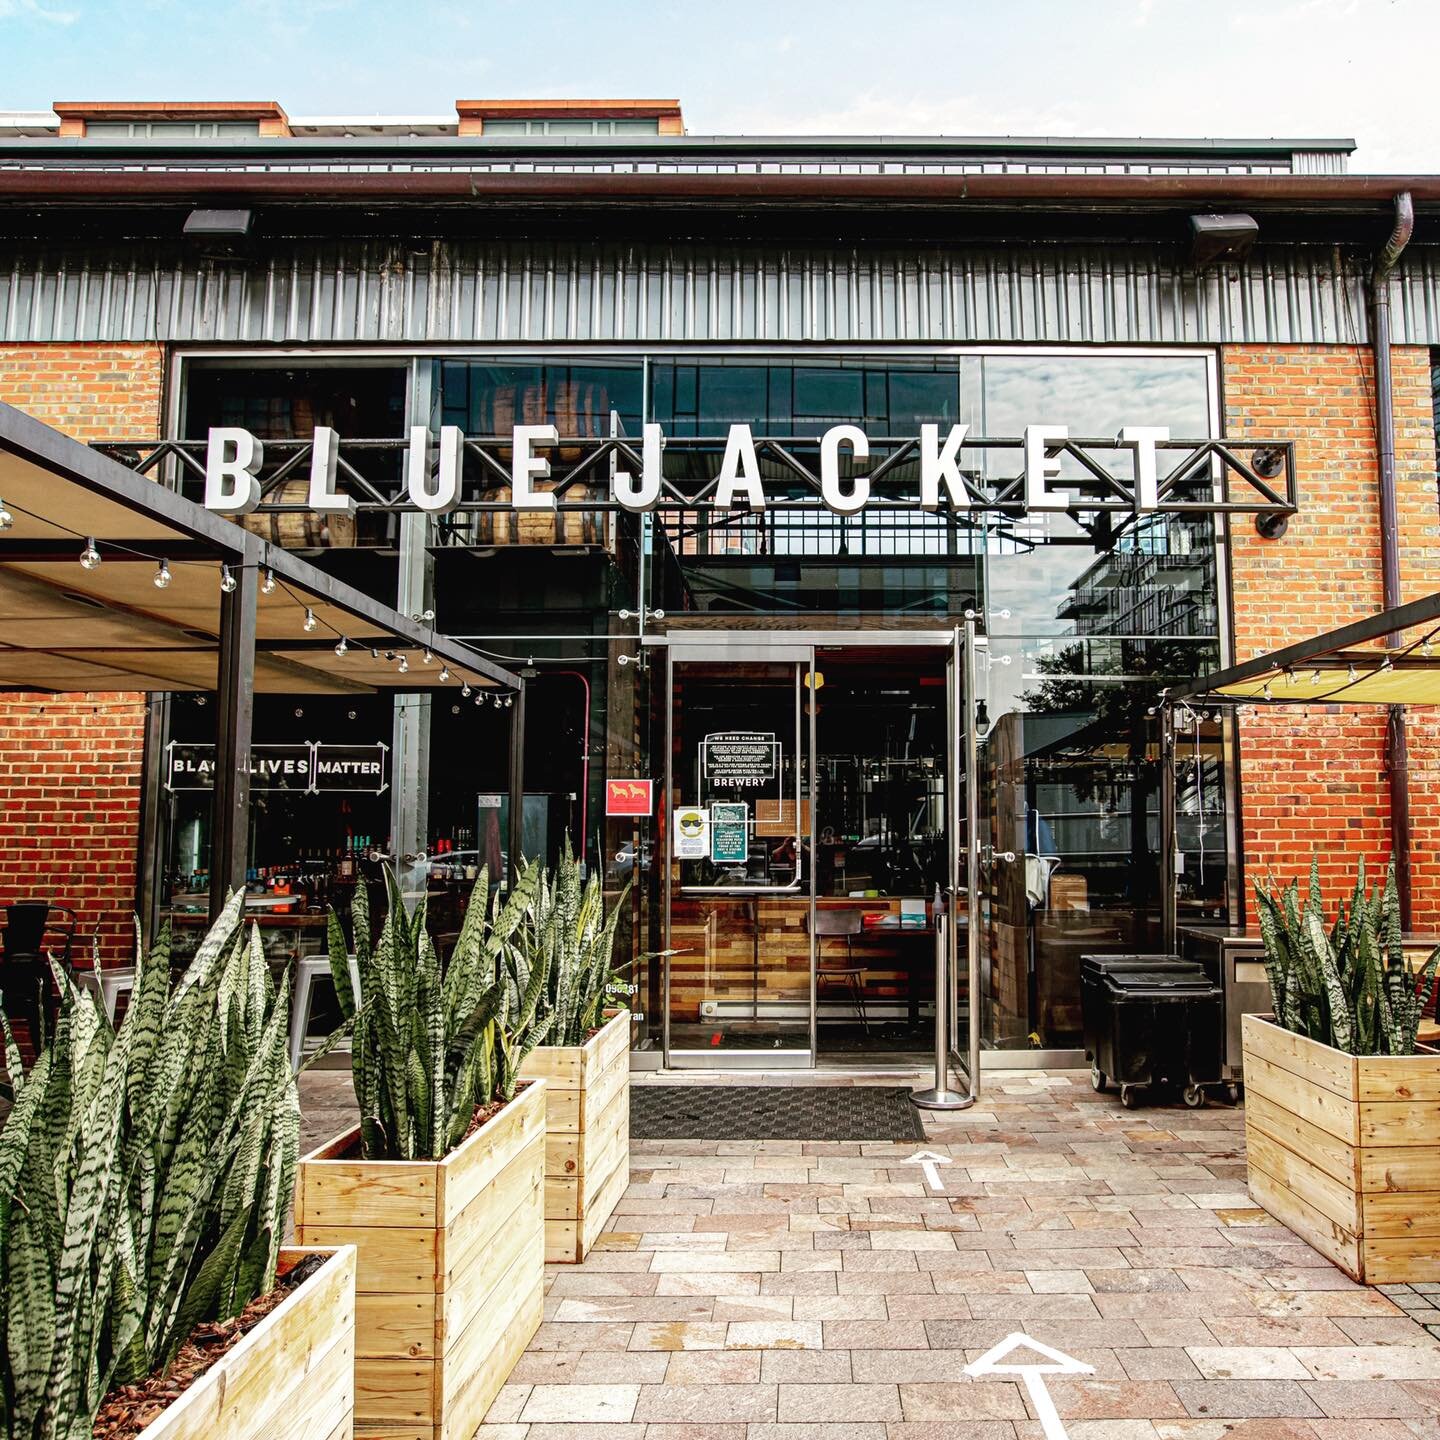 Bluejacket is a brewery specializing in a rotating menu of incredible craft beers. They offer rentals of their bottle shop, which is an intimate and unique setting for a small dinner party or you can rent out the second floor mezzanine which offers …